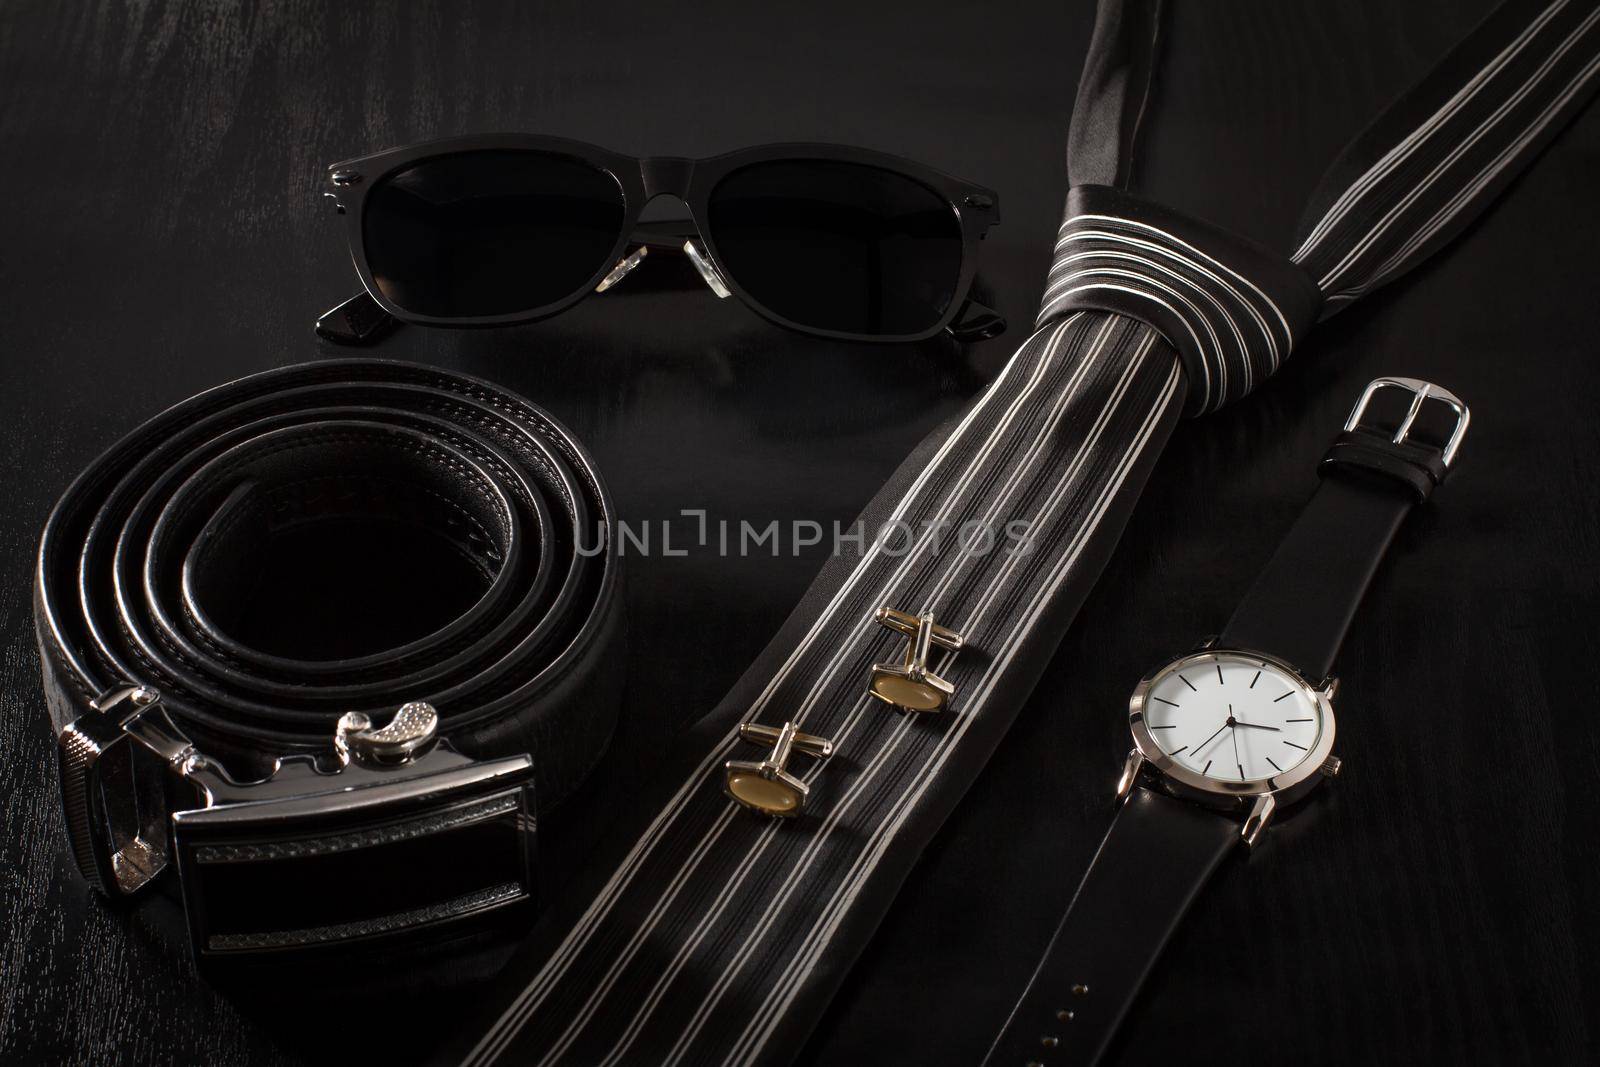 Leather belt with metal buckle, sunglasses, tie, cuff-links, watch with a leather strap on a black background